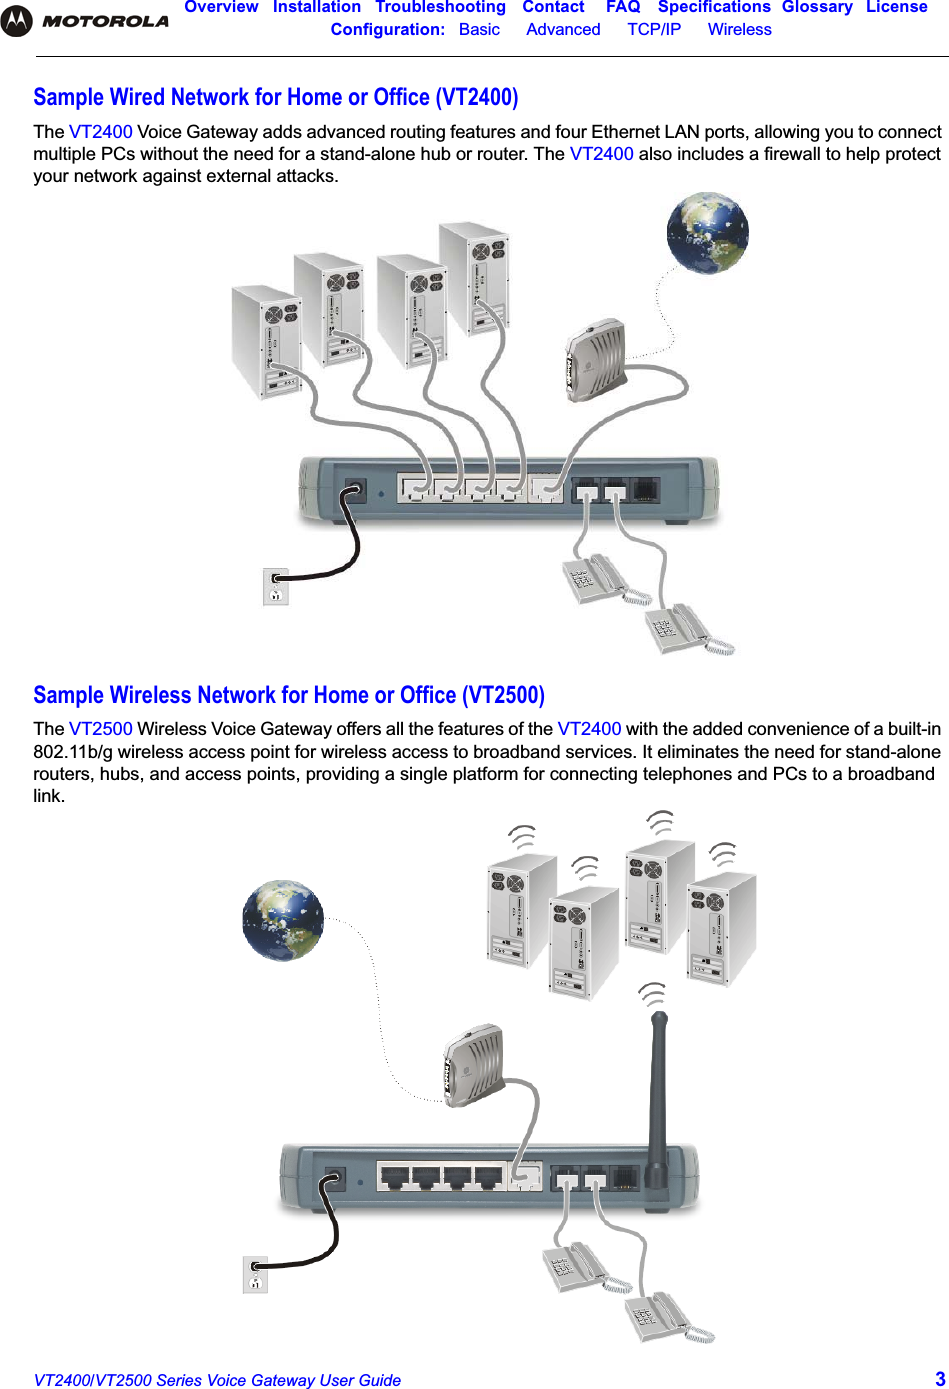 Overview Installation Troubleshooting Contact FAQ Specifications Glossary LicenseConfiguration:   Basic      Advanced      TCP/IP      Wireless VT2400/VT2500 Series Voice Gateway User Guide 3Sample Wired Network for Home or Office (VT2400)The VT2400 Voice Gateway adds advanced routing features and four Ethernet LAN ports, allowing you to connect multiple PCs without the need for a stand-alone hub or router. The VT2400 also includes a firewall to help protect your network against external attacks.Sample Wireless Network for Home or Office (VT2500)The VT2500 Wireless Voice Gateway offers all the features of the VT2400 with the added convenience of a built-in 802.11b/g wireless access point for wireless access to broadband services. It eliminates the need for stand-alone routers, hubs, and access points, providing a single platform for connecting telephones and PCs to a broadband link.